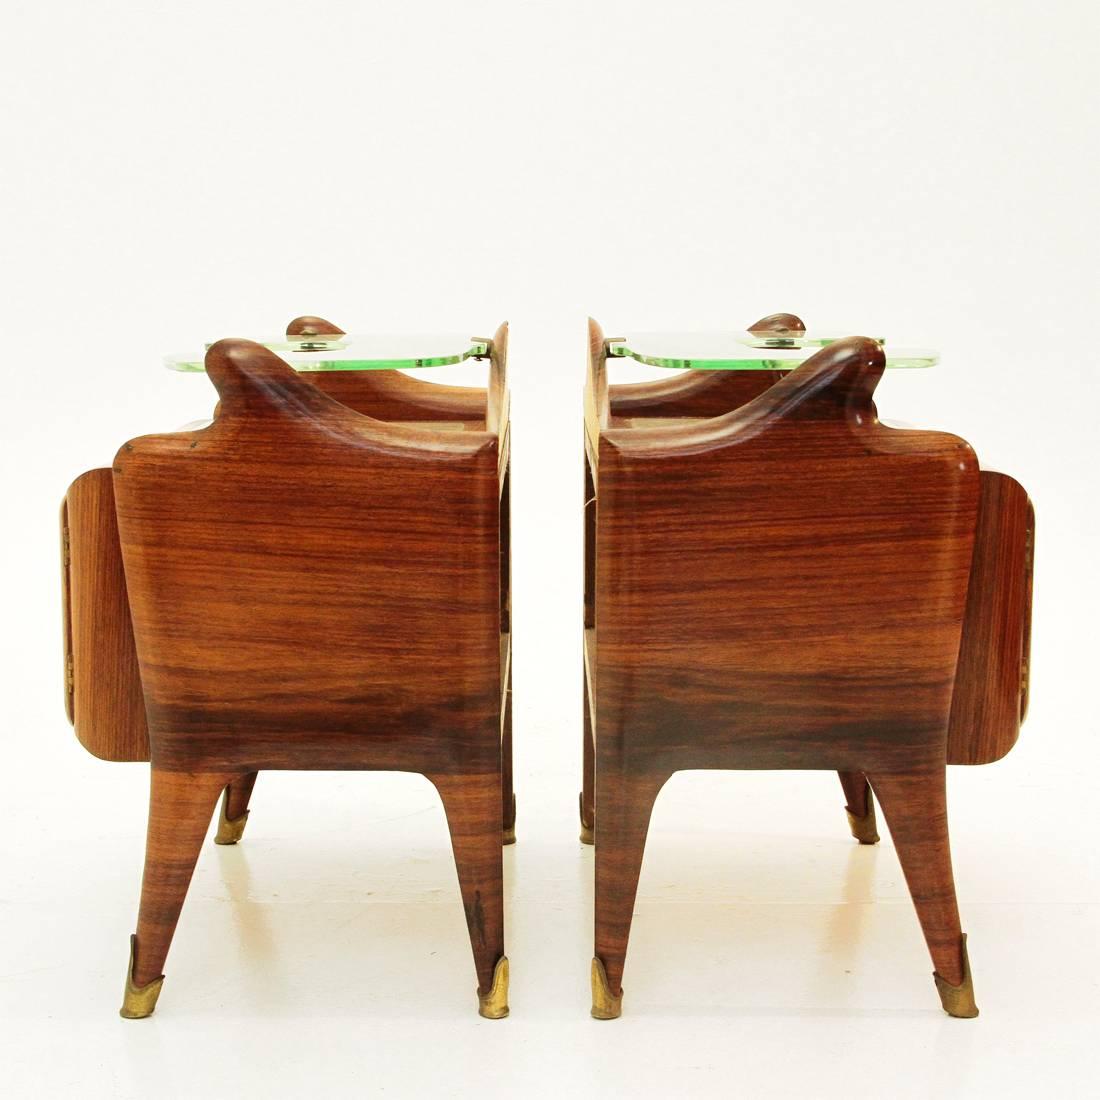 High refined pair of nightstands attributed to Paolo Buffa.
The nightstands have rosewood Herringbone pattern veneer with brass hardware and foots, colored glass top and a 